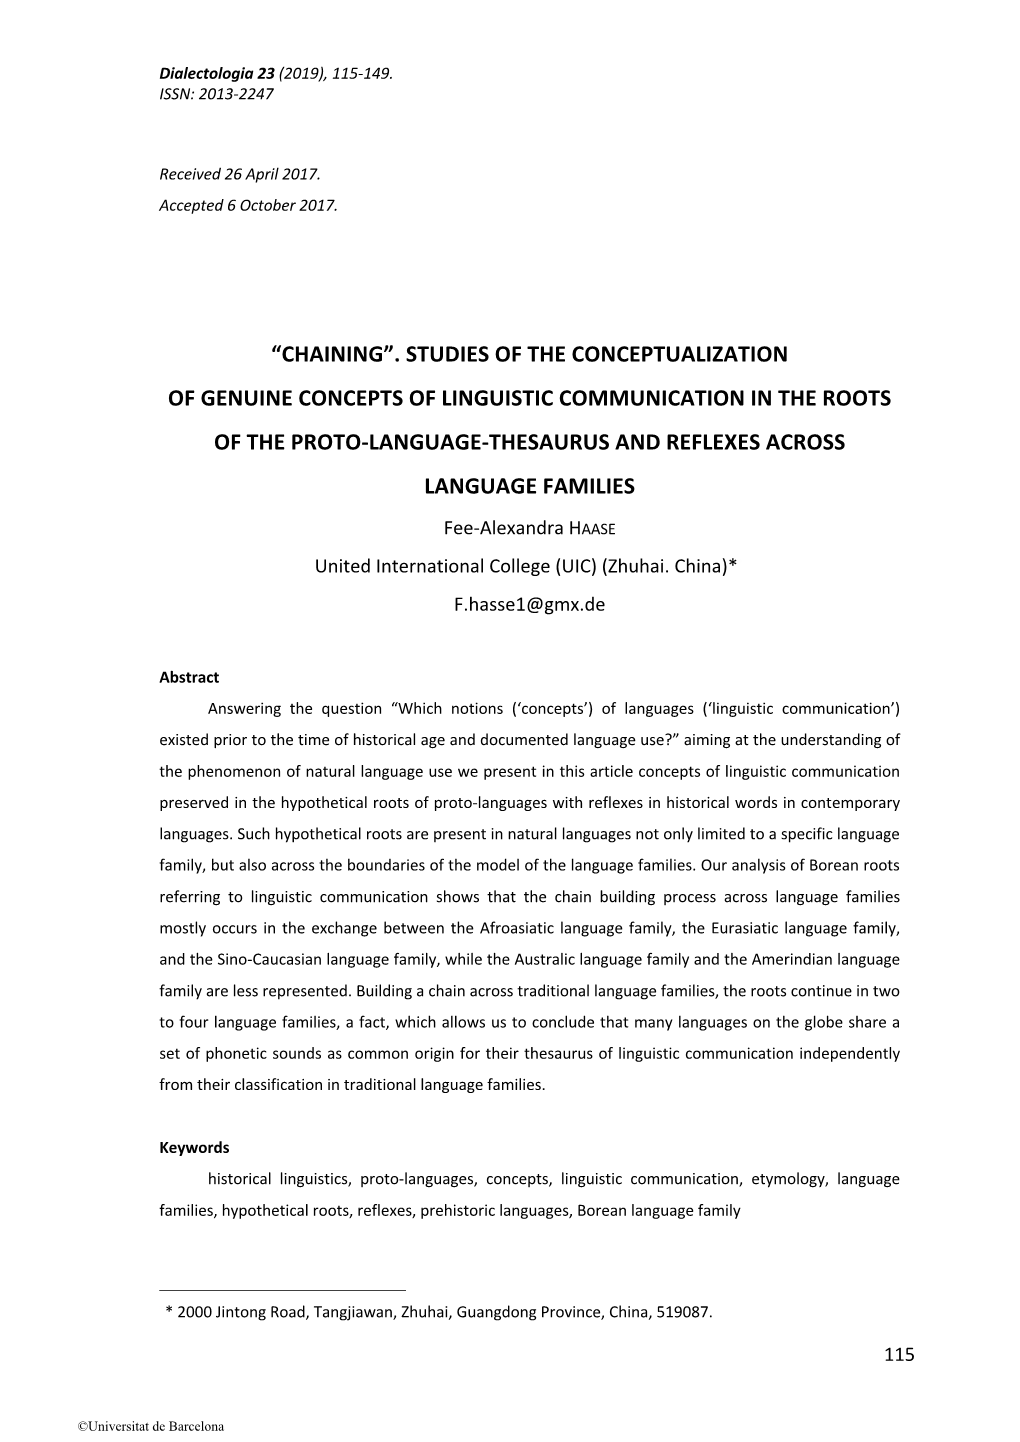 Studies of the Conceptualization of Genuine Concepts of Linguistic Communication in the Roots of the Proto-Language-Thesaurus and Reflexes Across Language Families